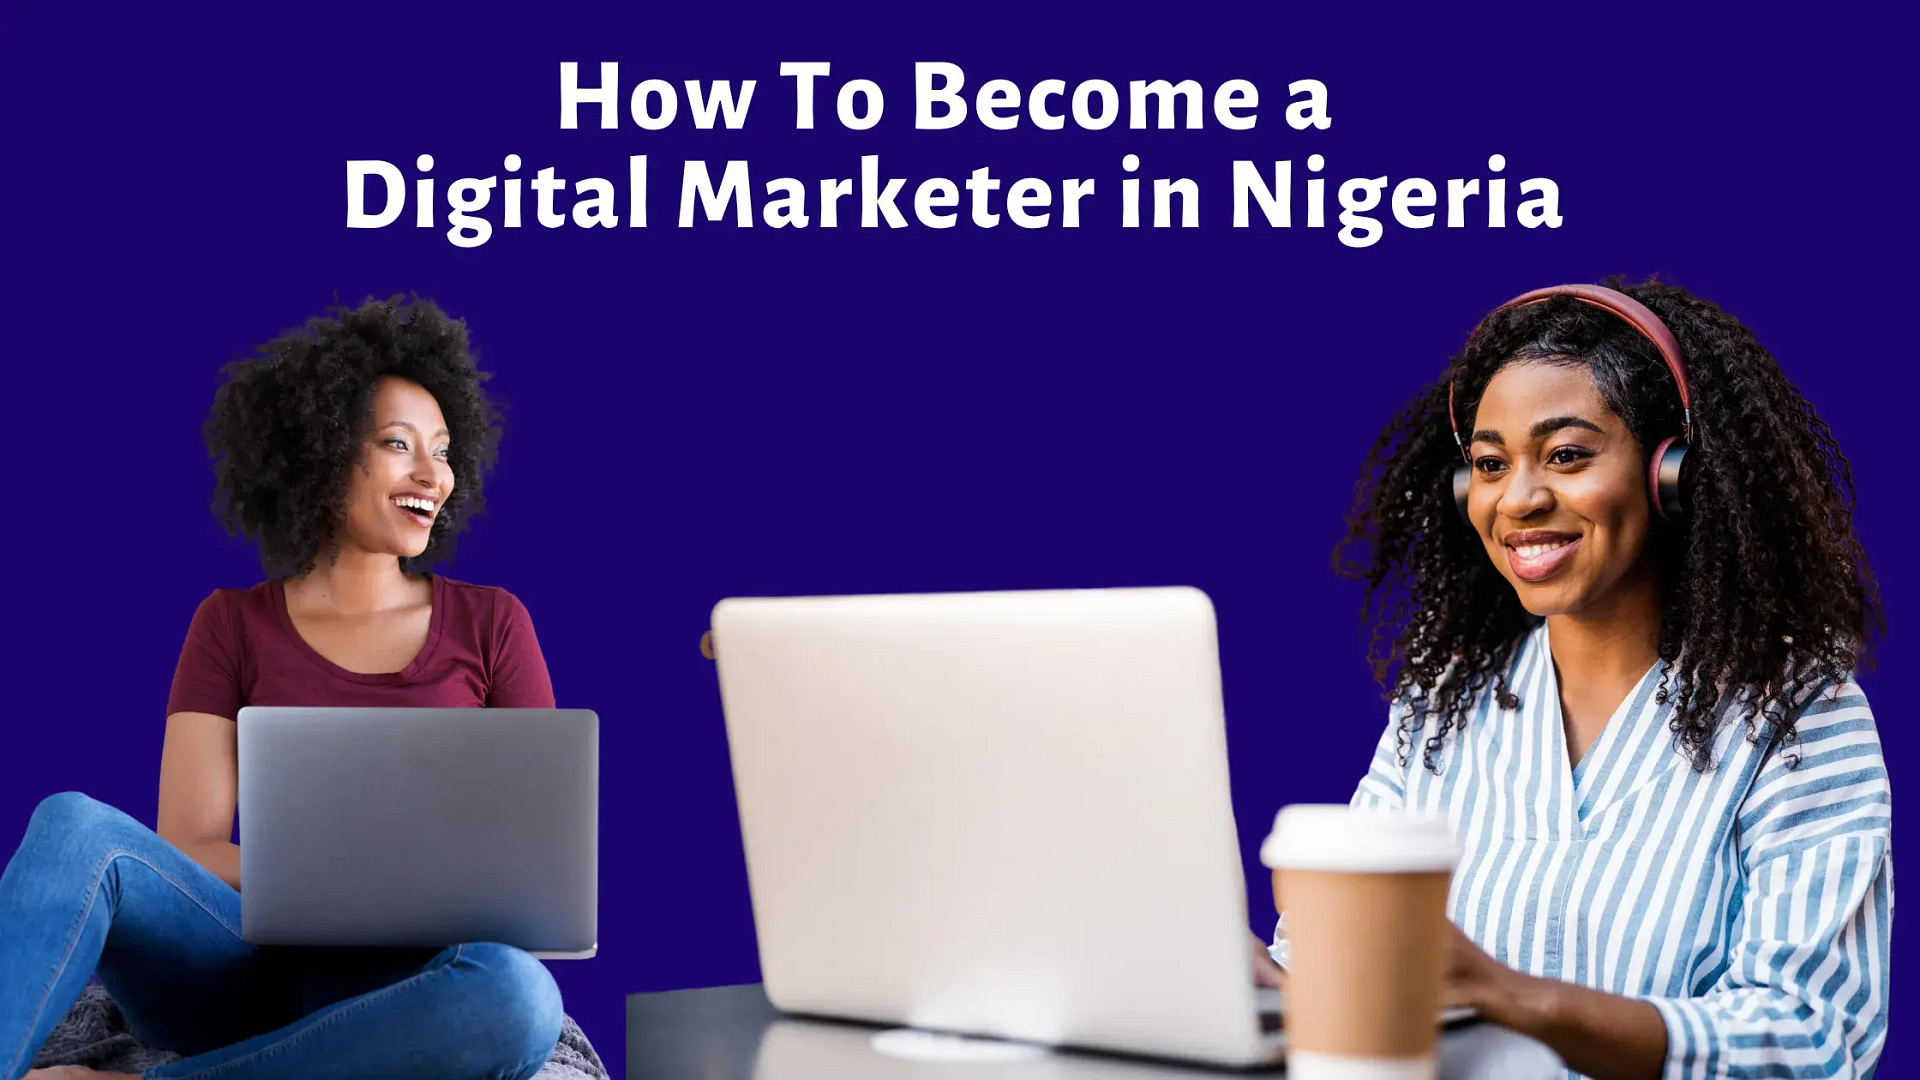 You are currently viewing How To Become a Digital Marketer in Nigeria